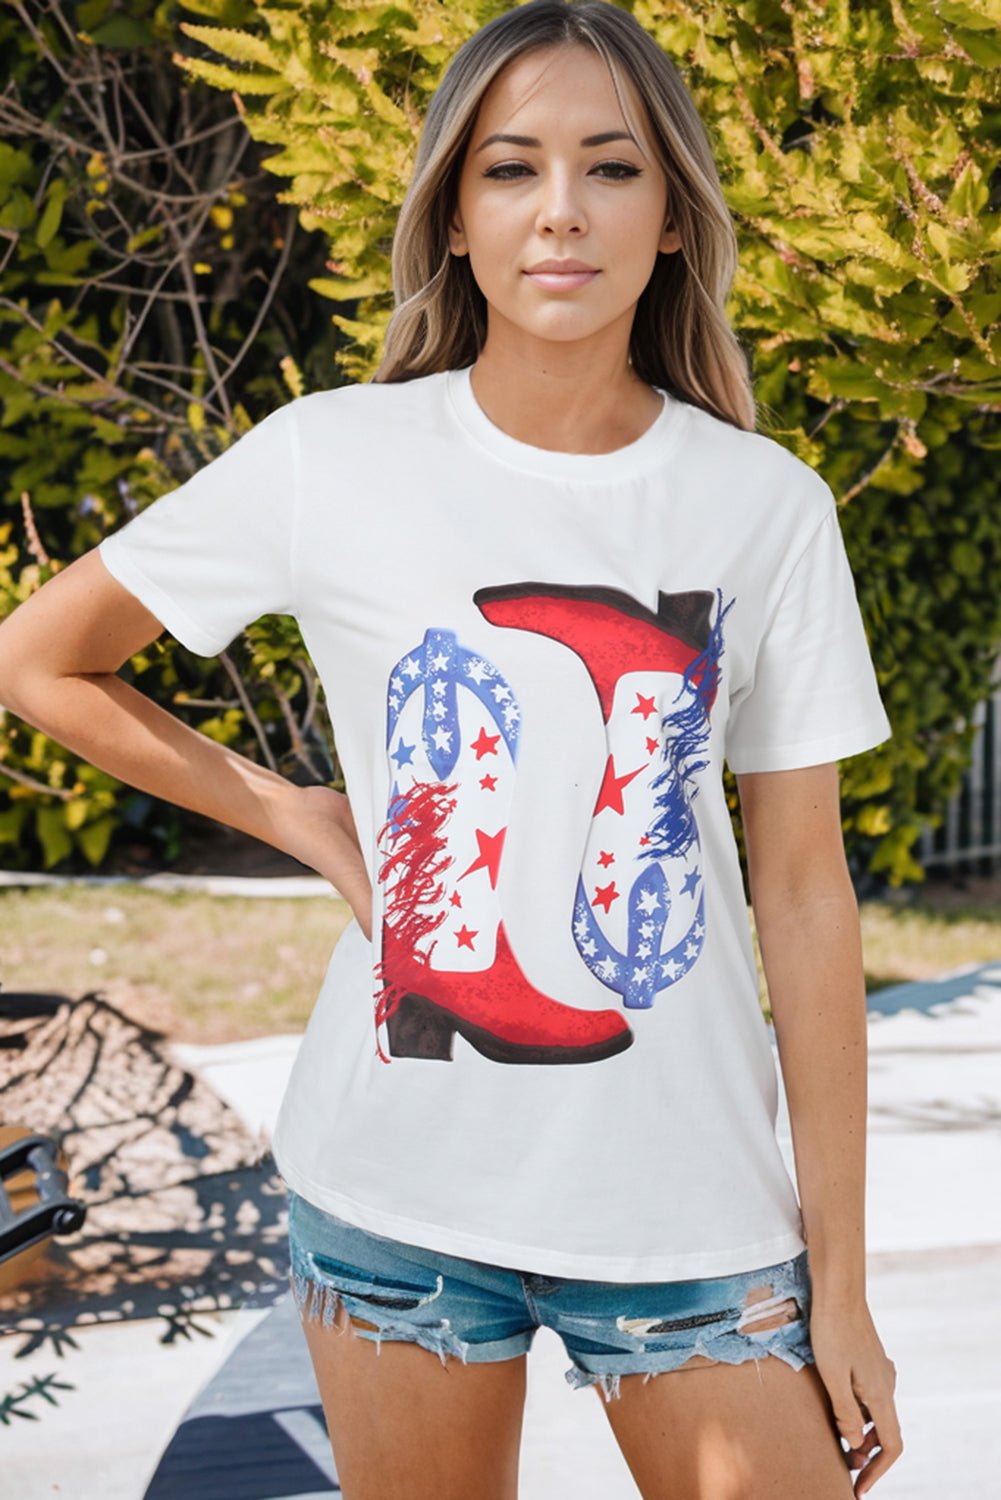 Star Cowboy Boots Graphic Tee - OMG! Rose